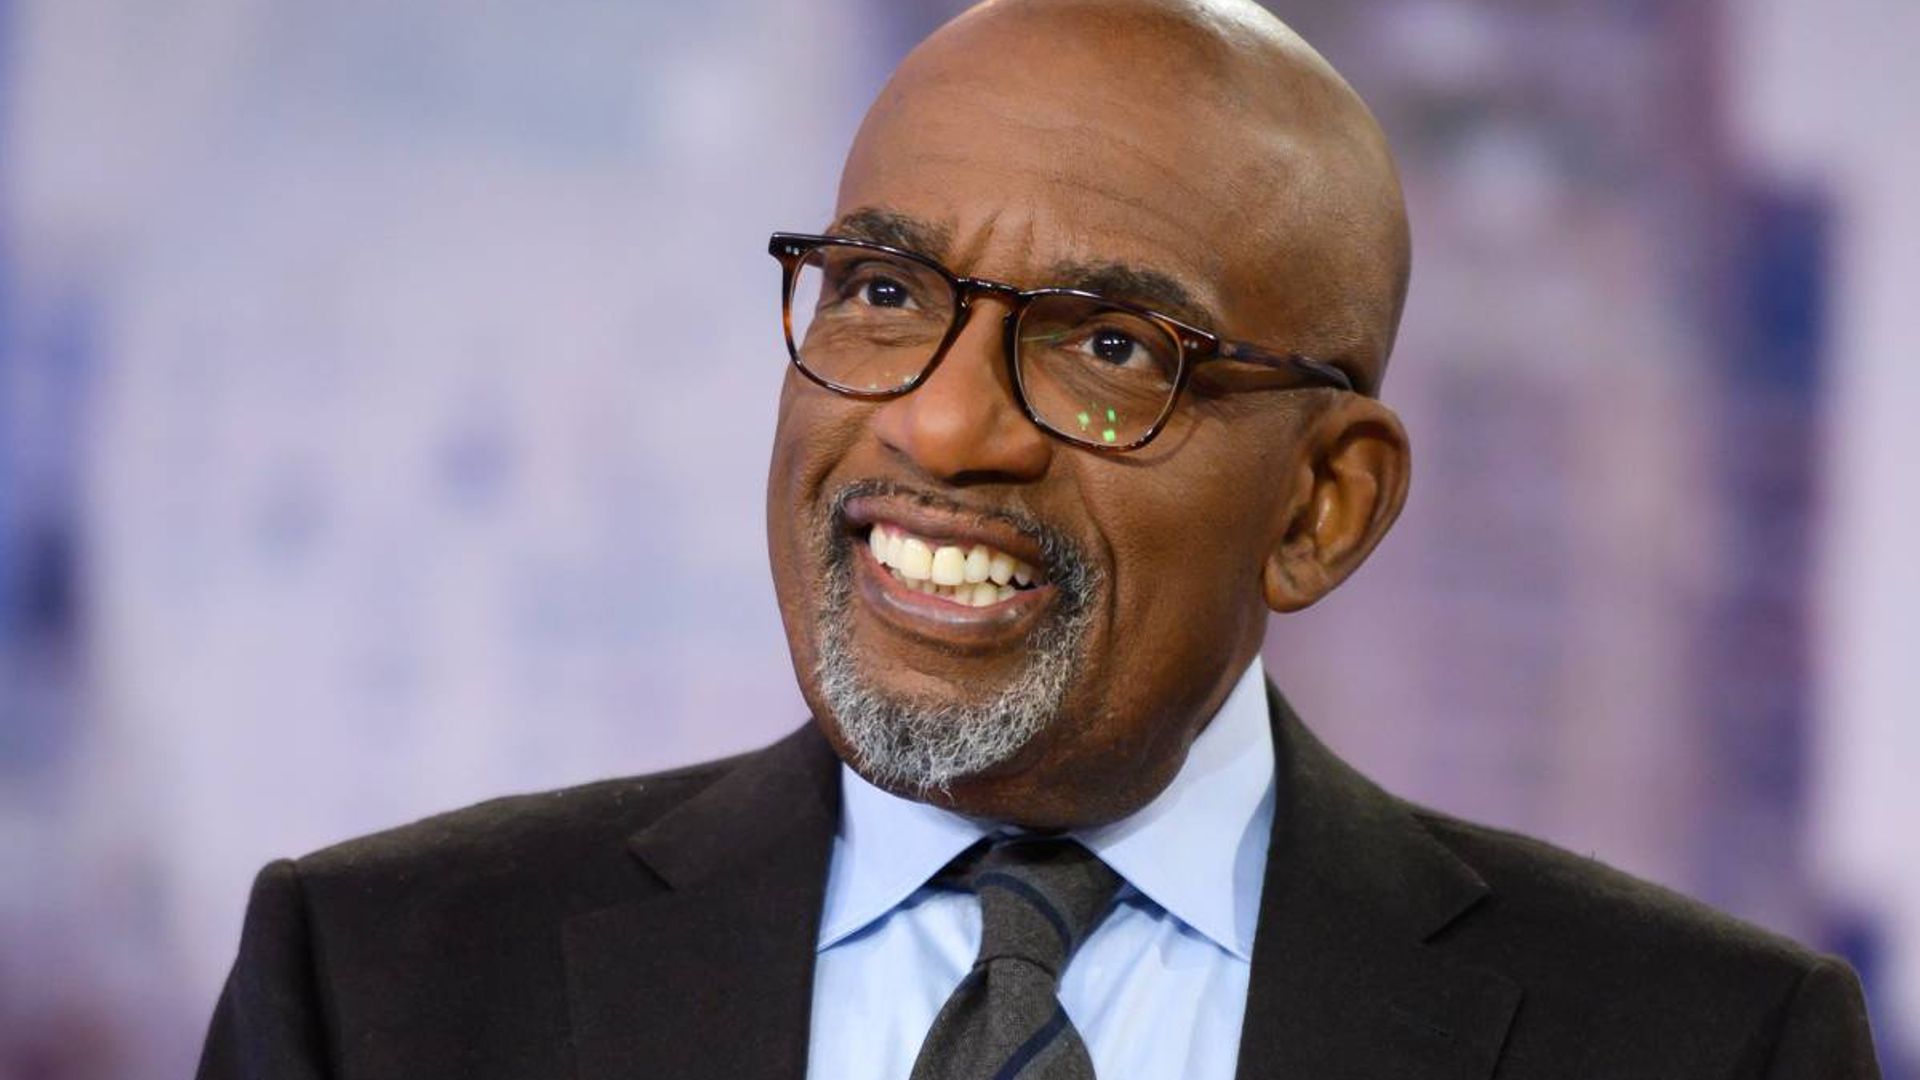 Today's Al Roker left uncertain following Covid results as he's forced